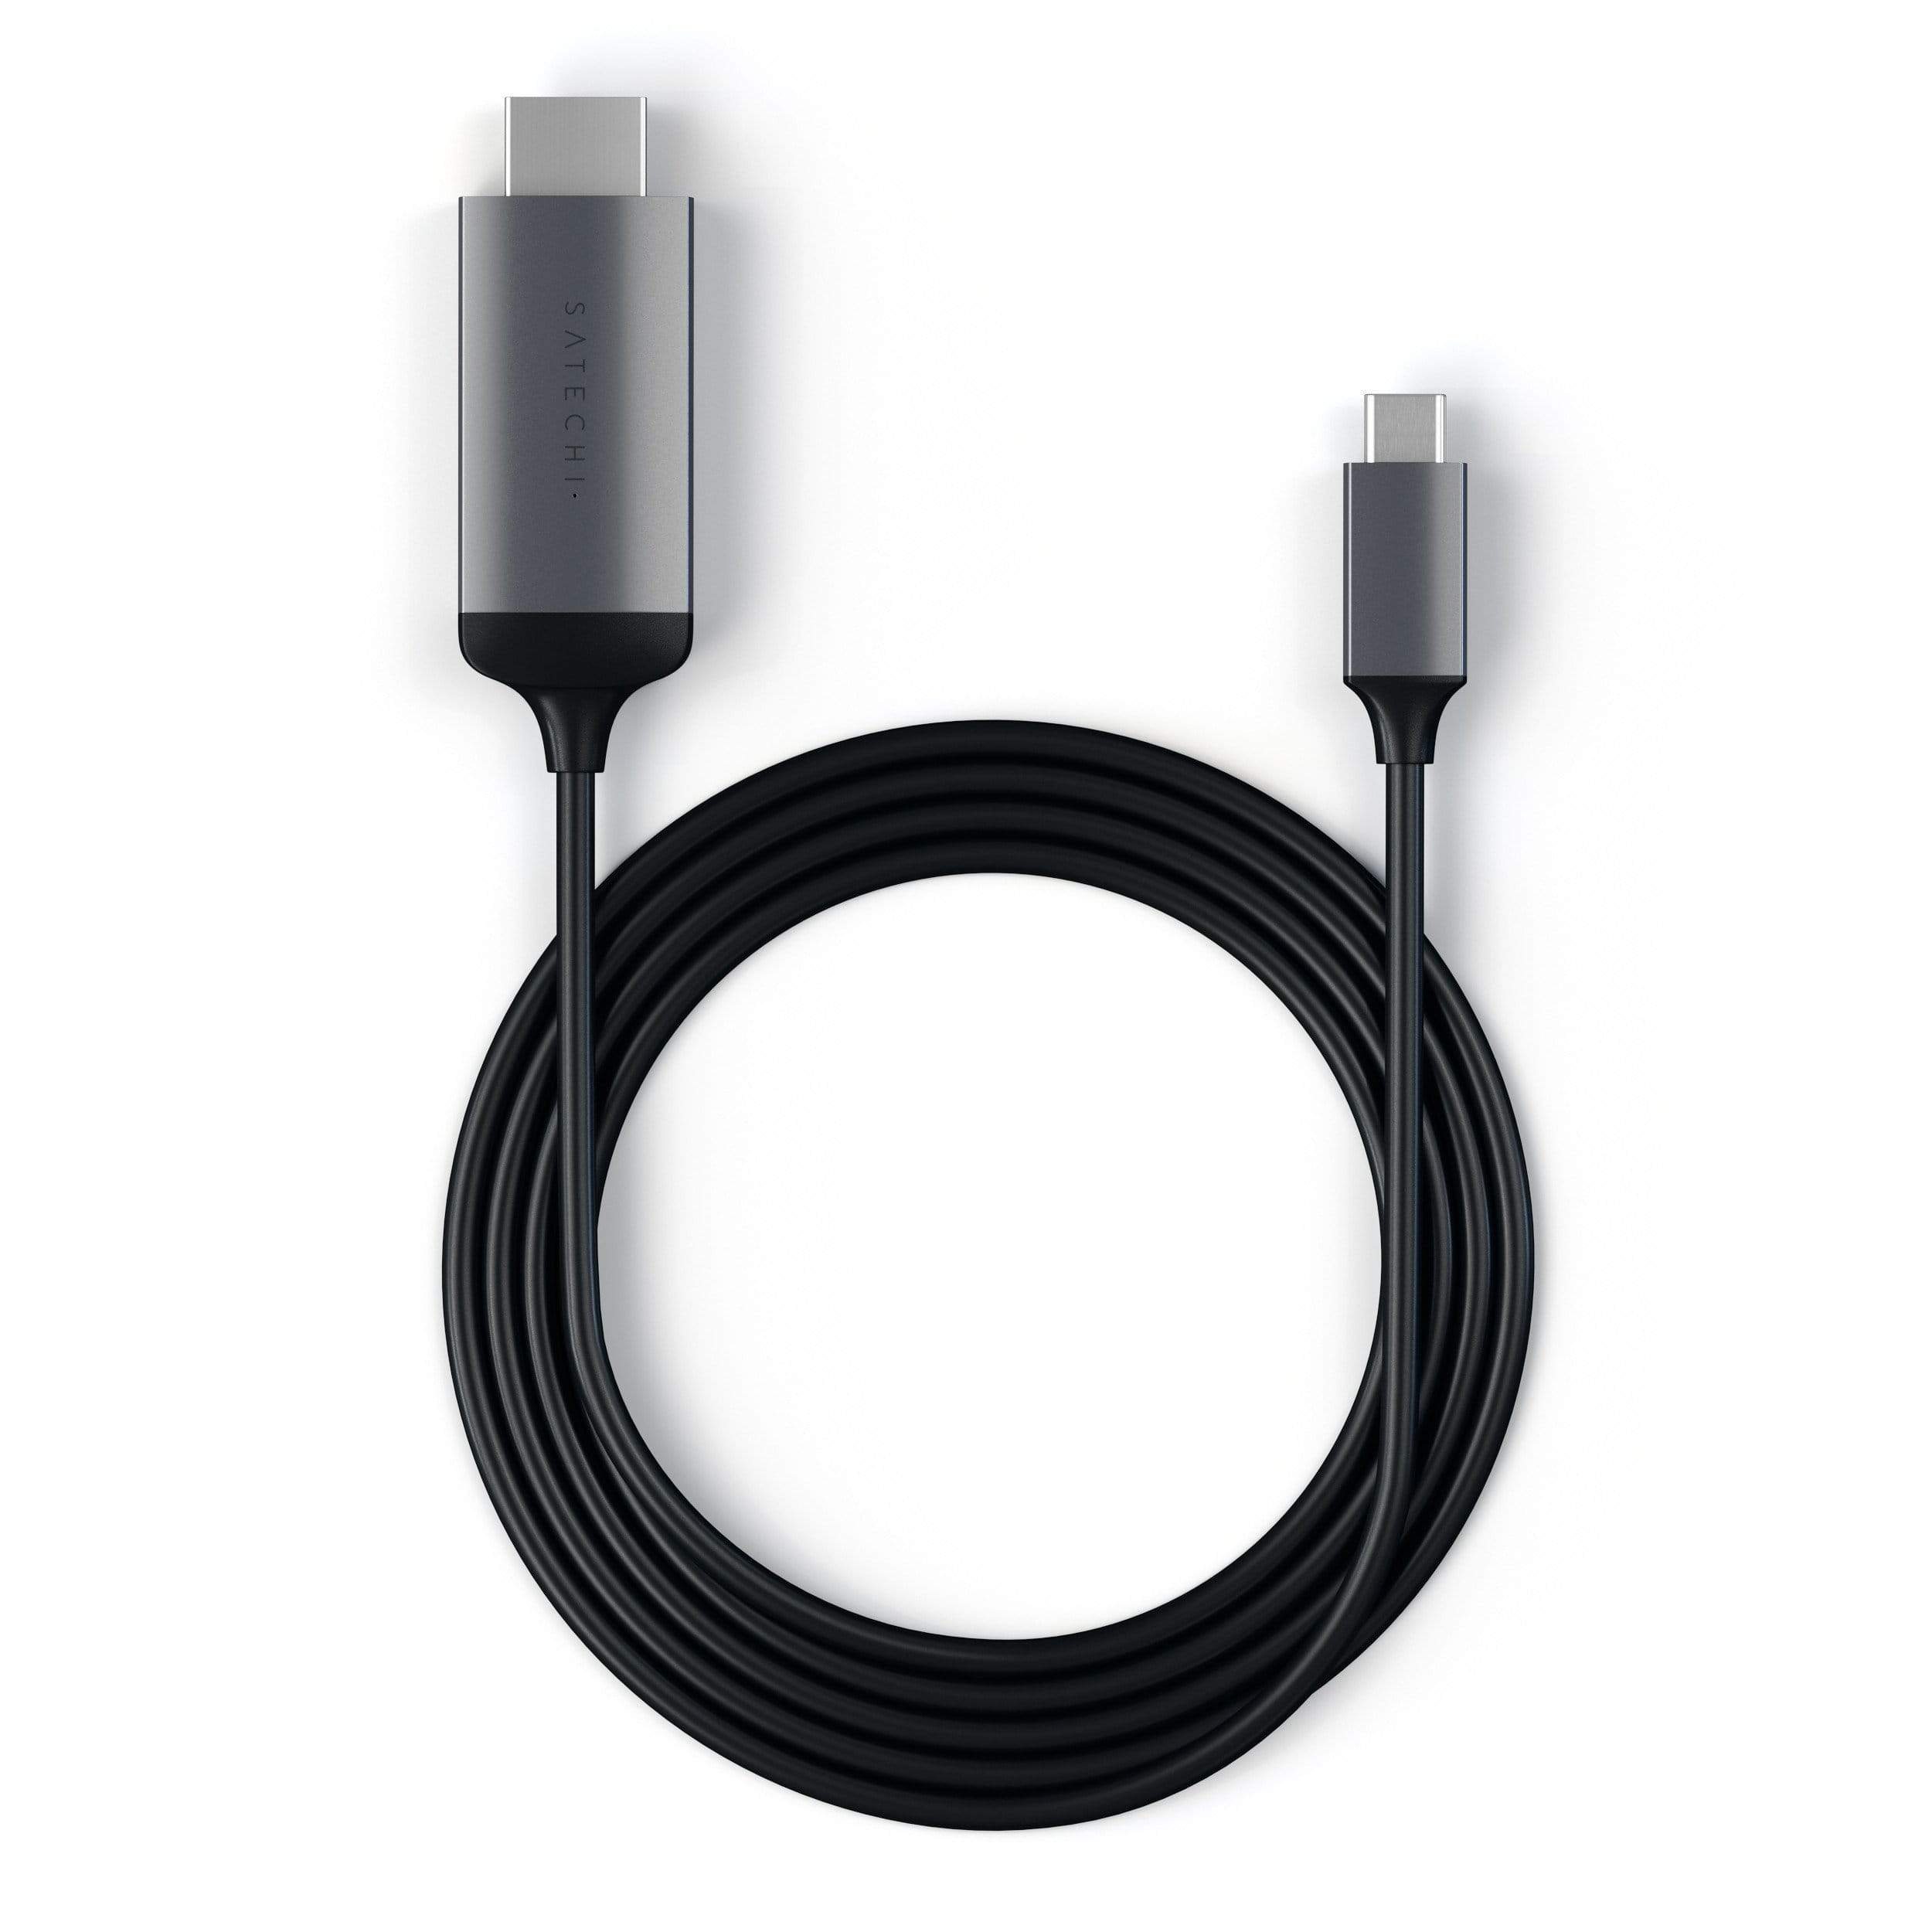 USB Type-C to HDMI Cable 4K - Satechi 60Hz